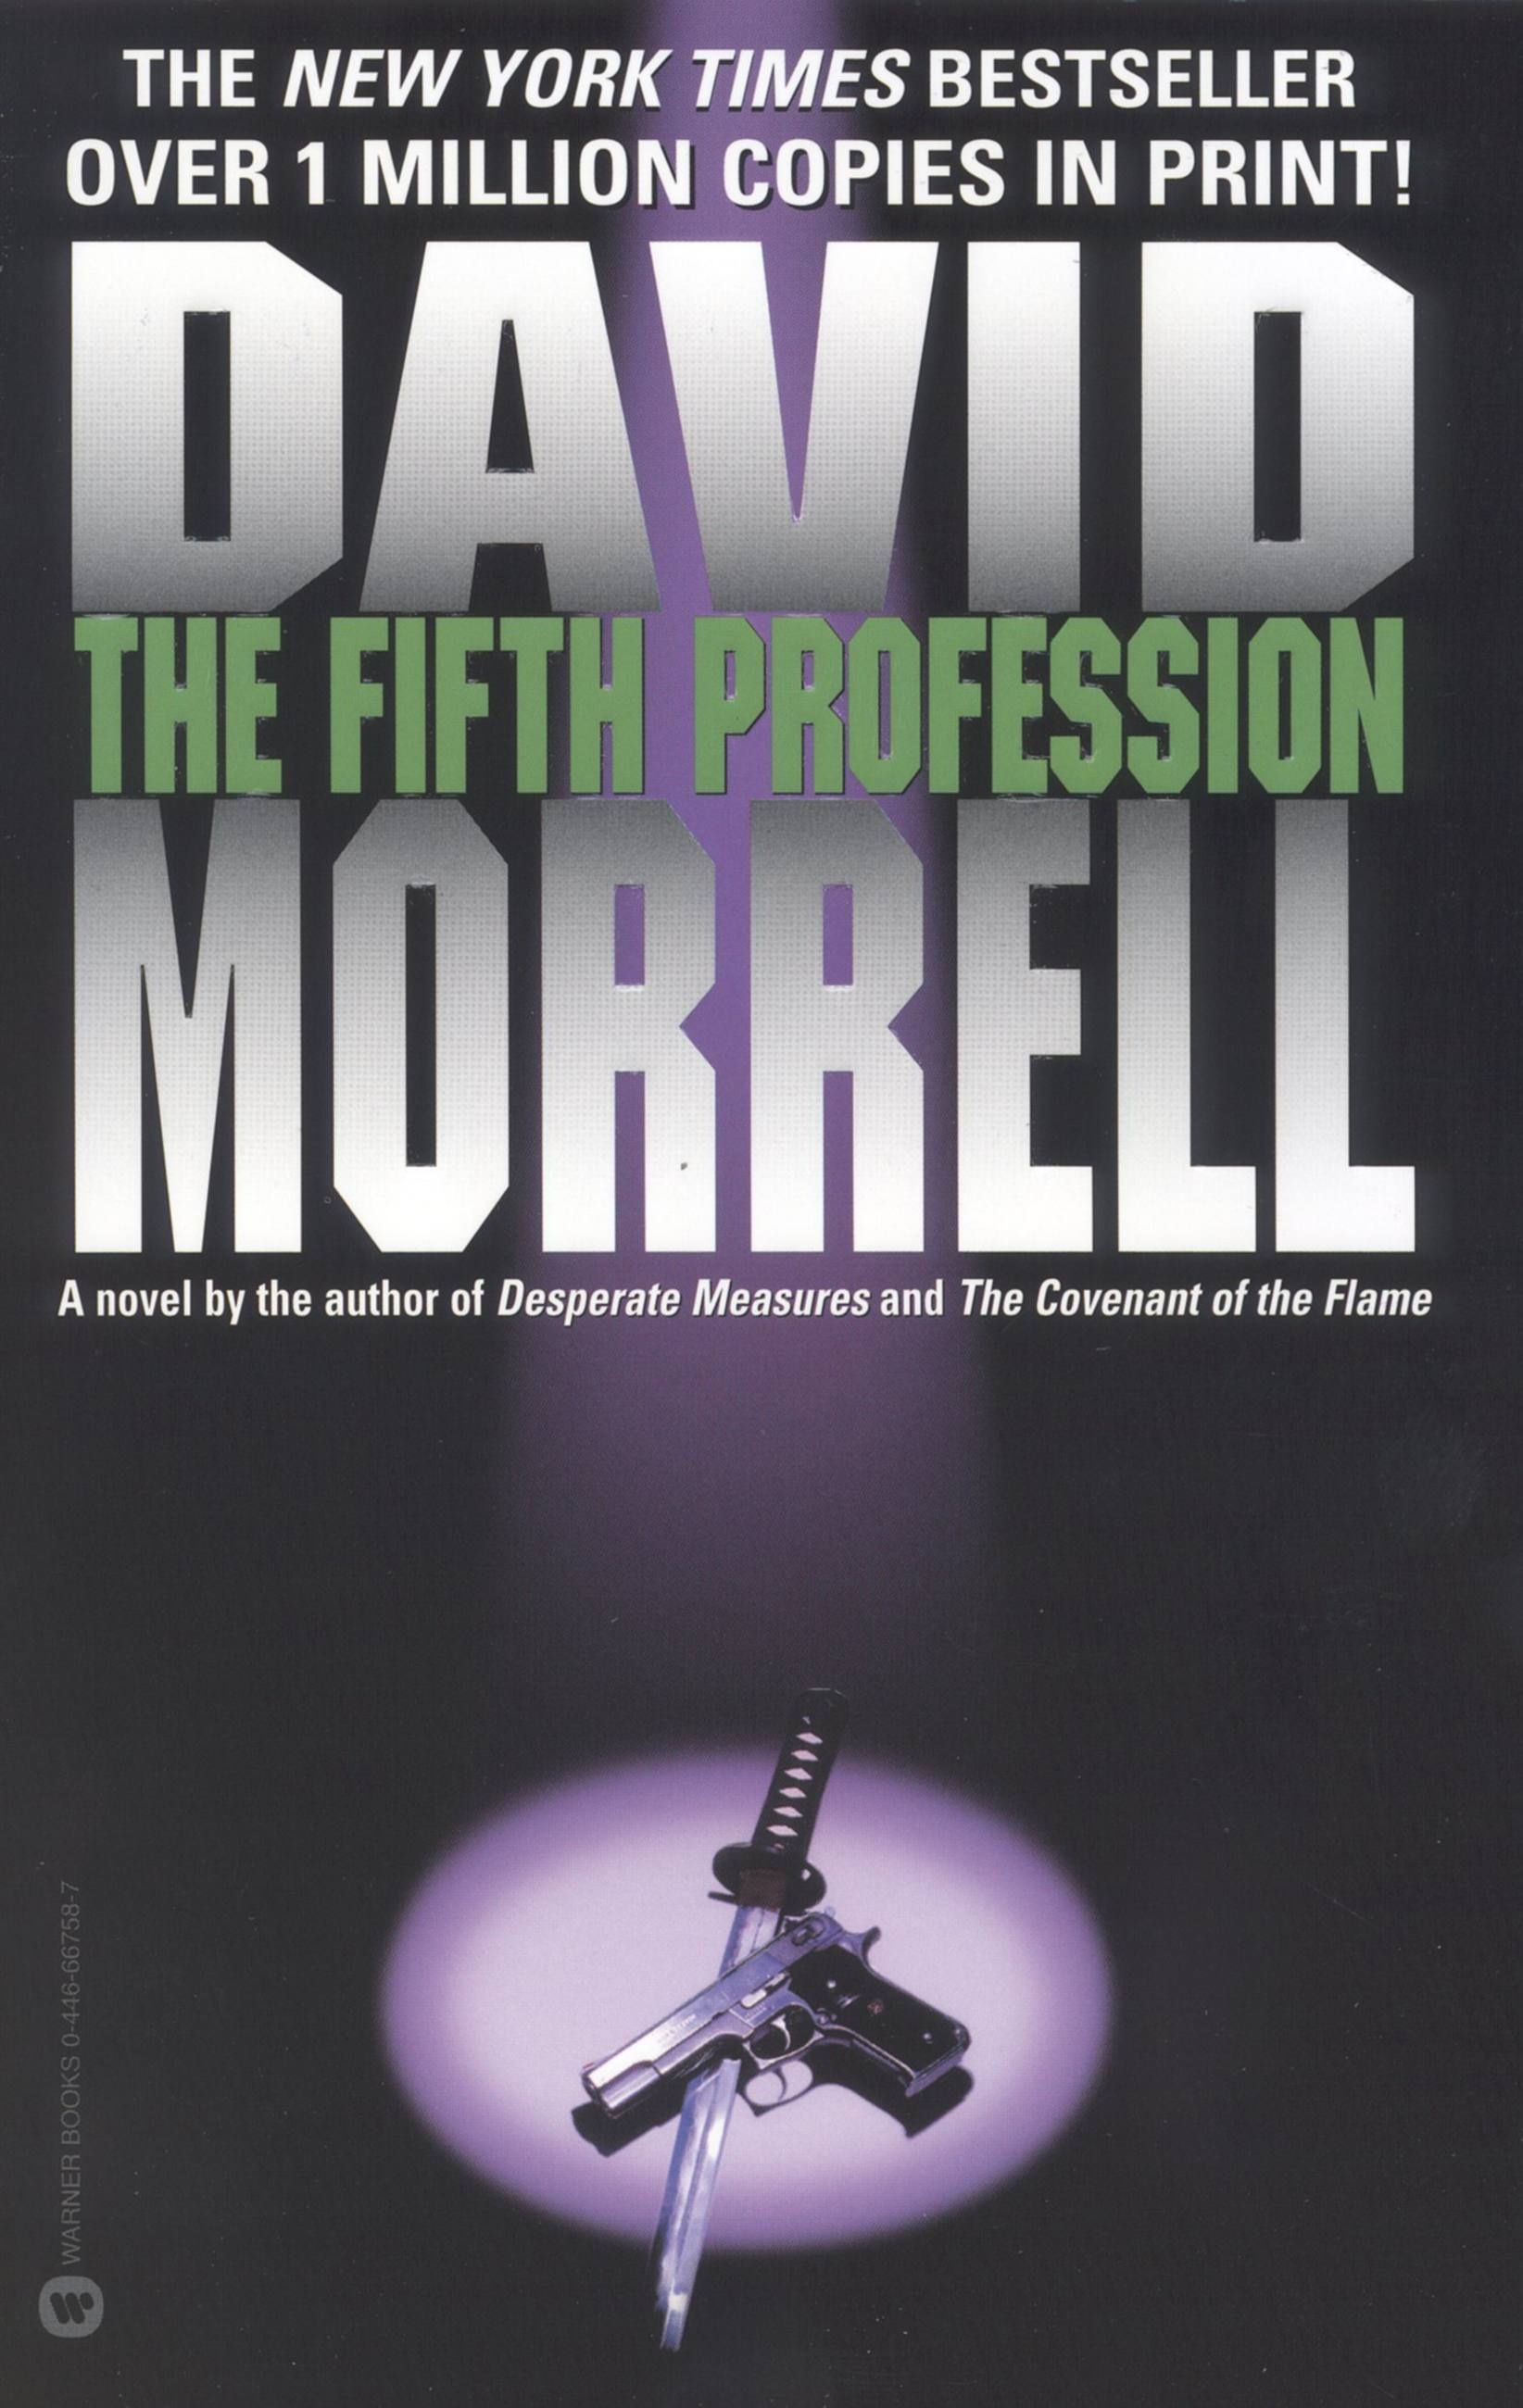 Book　Hachette　Profession　Morrell　by　David　Fifth　The　Group